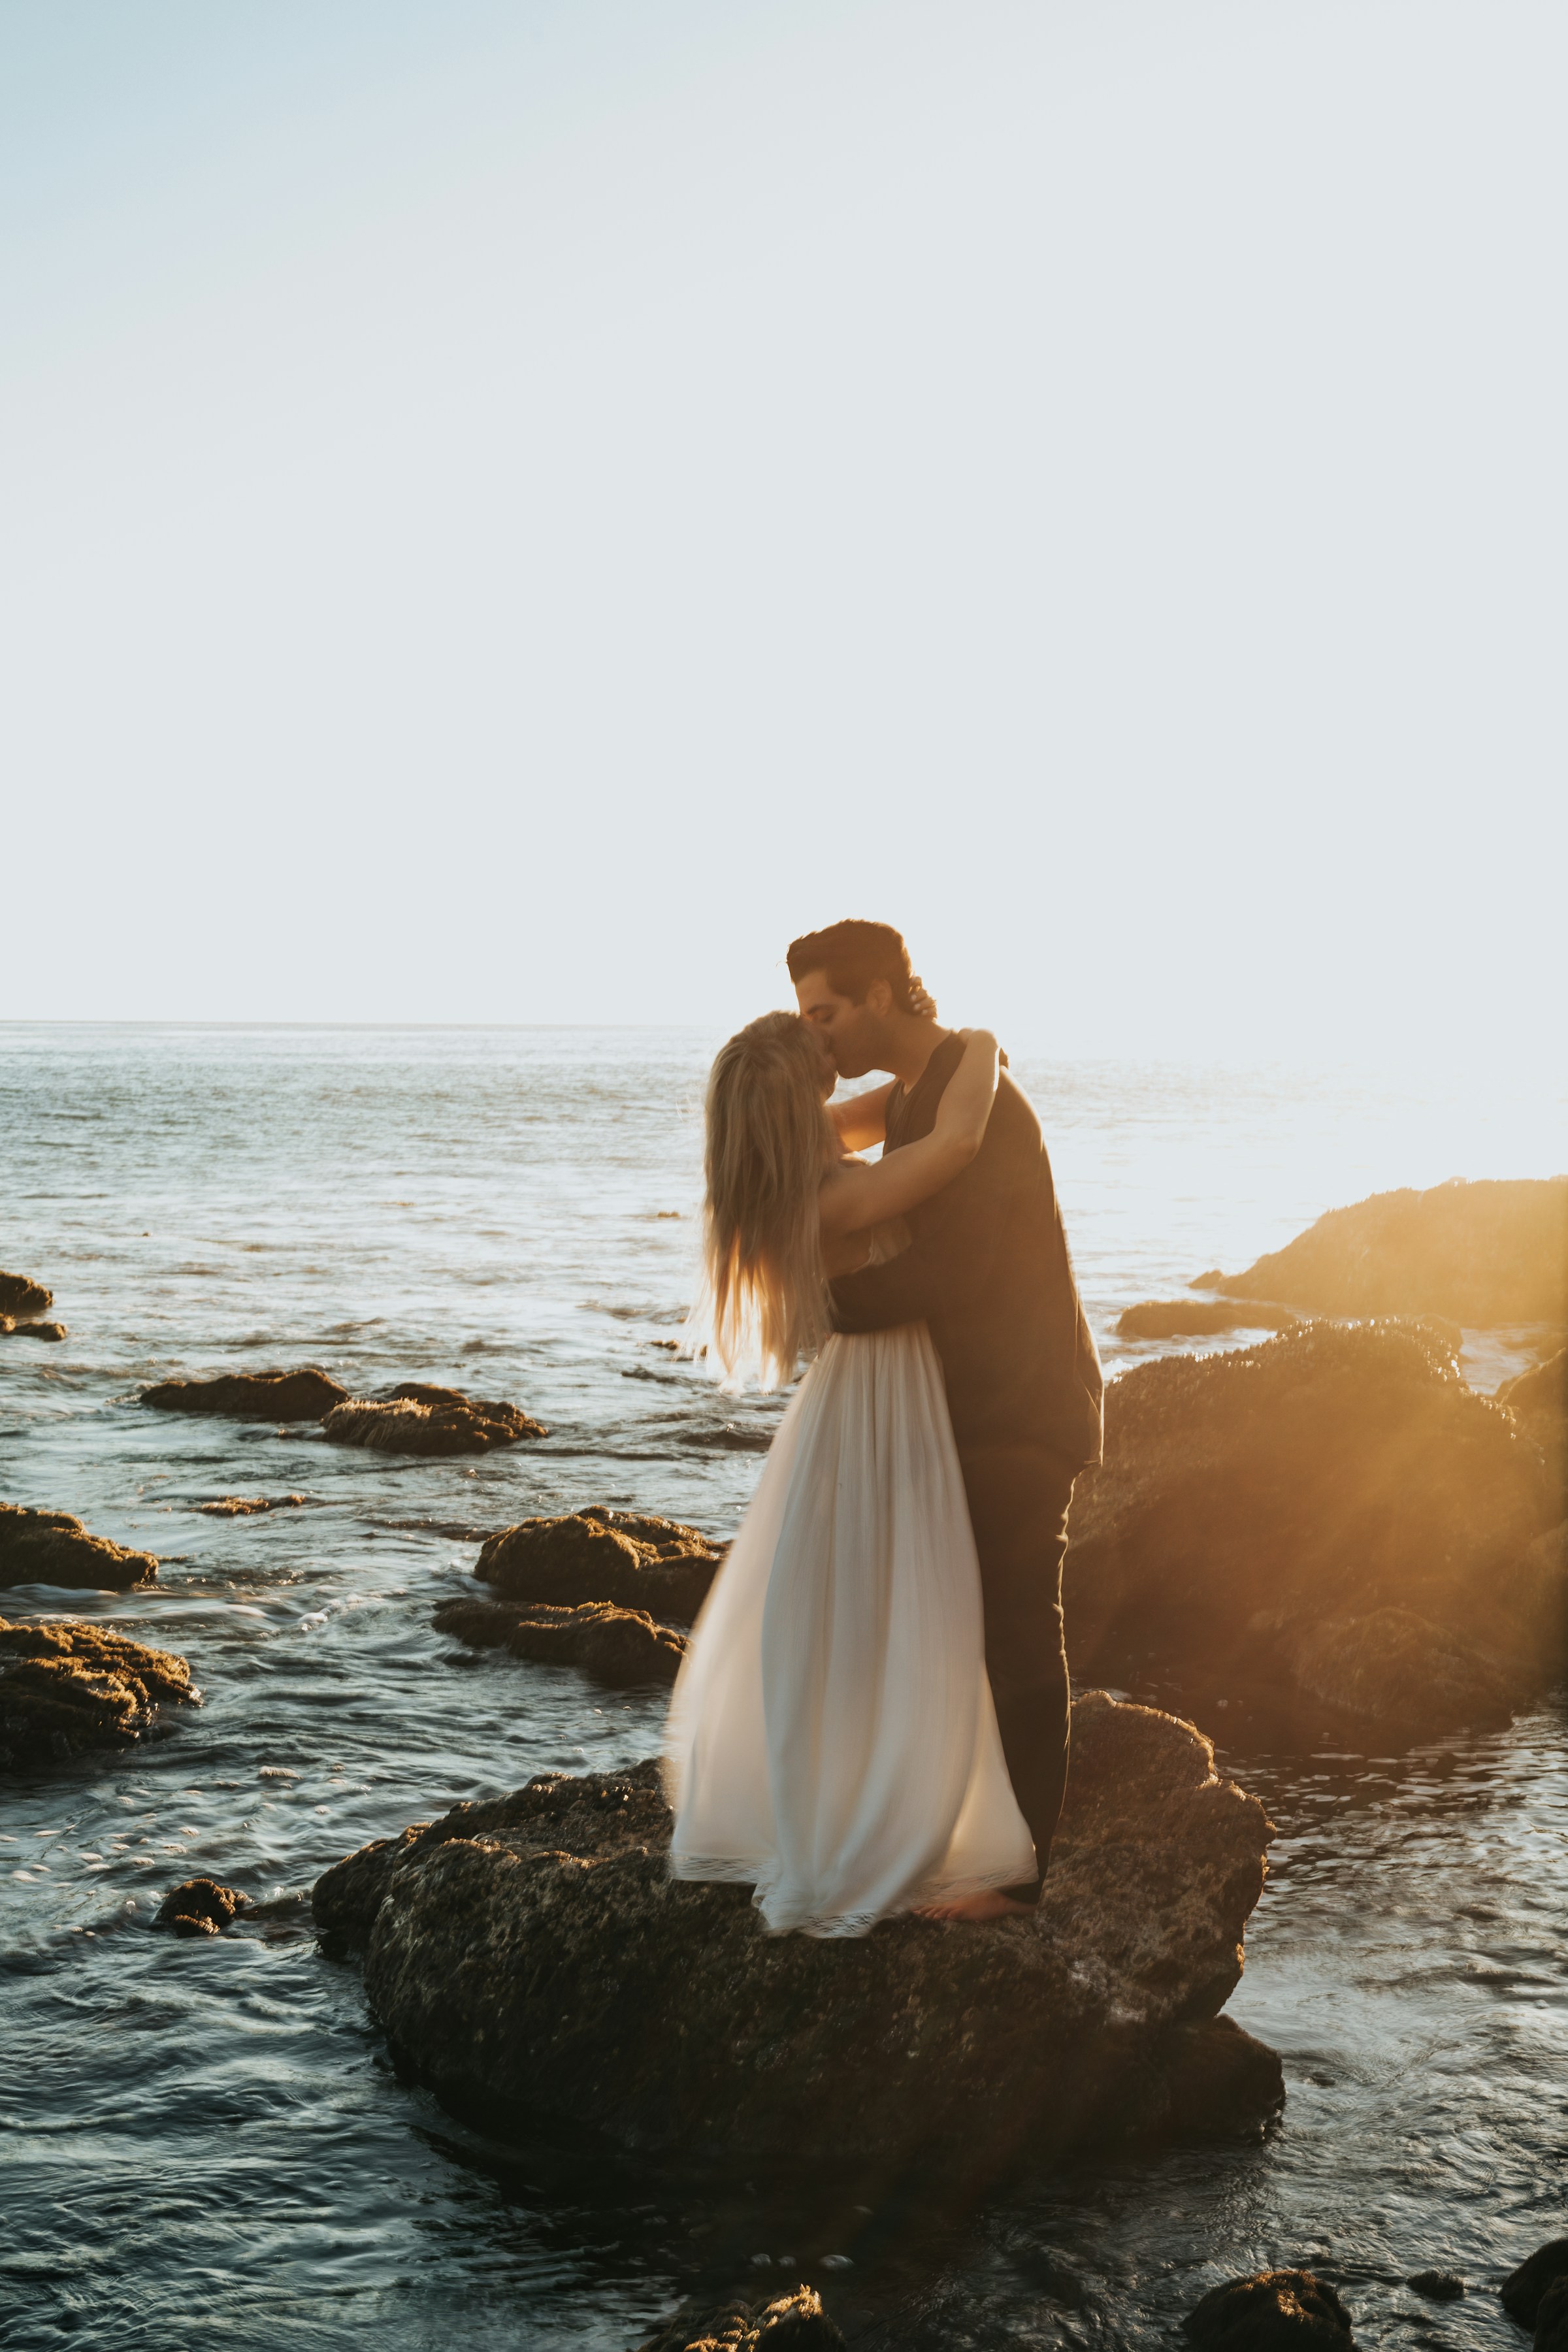 A couple kissing while standing on top of a rock at a beach | Source: Unsplash